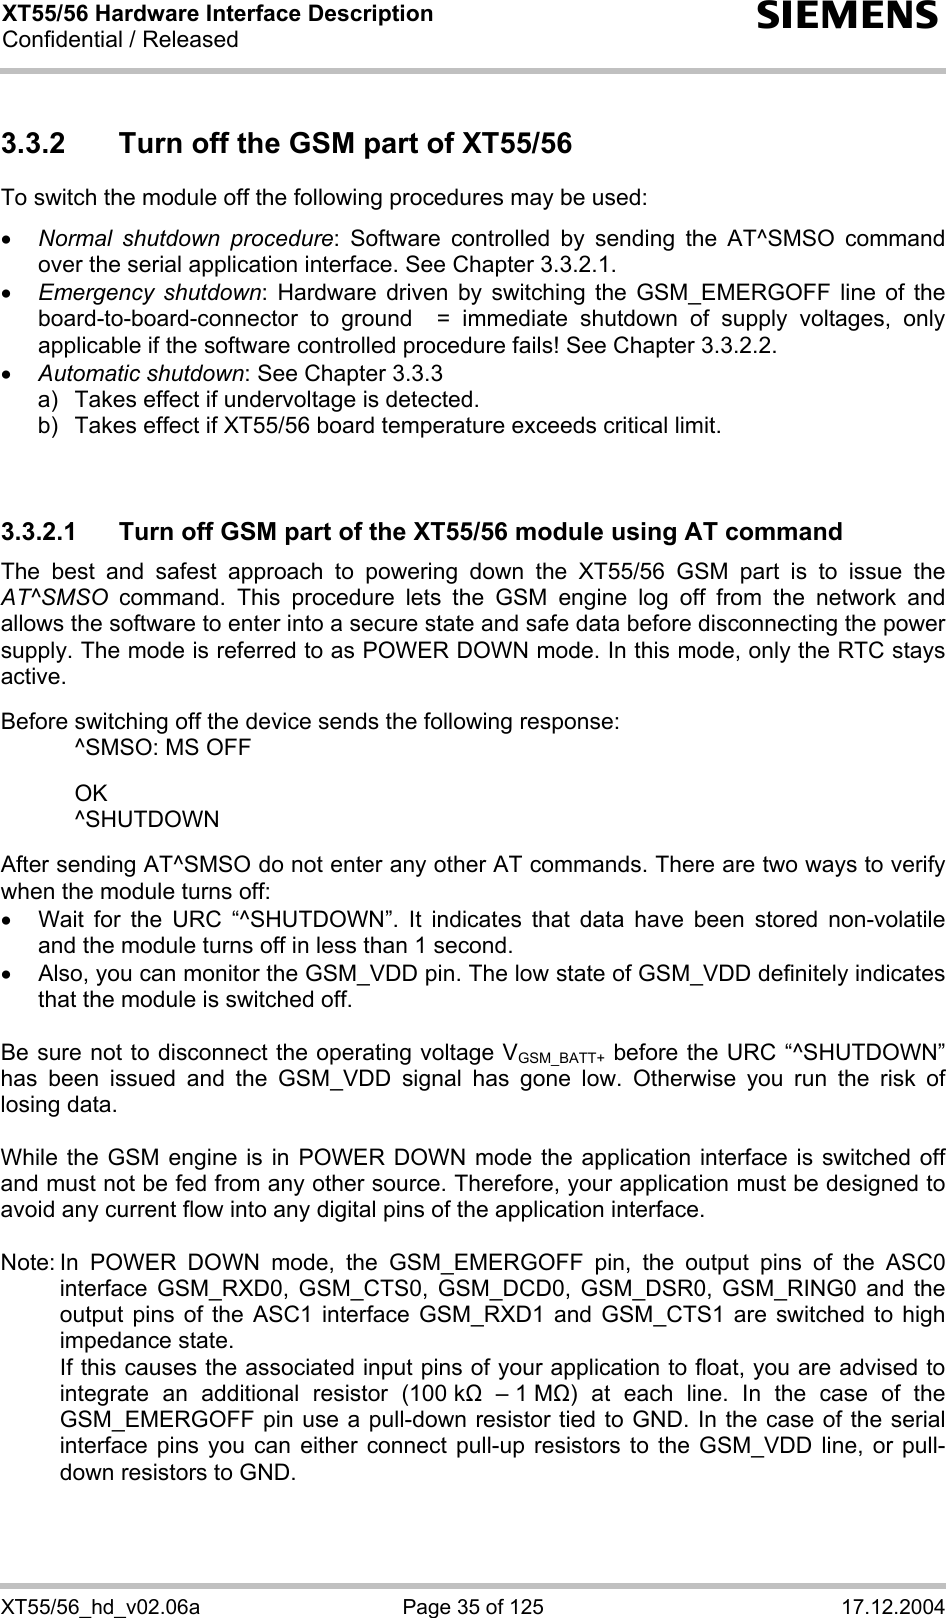 XT55/56 Hardware Interface Description Confidential / Released s XT55/56_hd_v02.06a  Page 35 of 125  17.12.2004 3.3.2  Turn off the GSM part of XT55/56 To switch the module off the following procedures may be used:  • Normal shutdown procedure: Software controlled by sending the AT^SMSO command over the serial application interface. See Chapter 3.3.2.1. • Emergency shutdown: Hardware driven by switching the GSM_EMERGOFF line of the board-to-board-connector to ground  = immediate shutdown of supply voltages, only applicable if the software controlled procedure fails! See Chapter 3.3.2.2. • Automatic shutdown: See Chapter 3.3.3 a)   Takes effect if undervoltage is detected.  b)  Takes effect if XT55/56 board temperature exceeds critical limit.   3.3.2.1  Turn off GSM part of the XT55/56 module using AT command The best and safest approach to powering down the XT55/56 GSM part is to issue the AT^SMSO command. This procedure lets the GSM engine log off from the network and allows the software to enter into a secure state and safe data before disconnecting the power supply. The mode is referred to as POWER DOWN mode. In this mode, only the RTC stays active.  Before switching off the device sends the following response:    ^SMSO: MS OFF    OK   ^SHUTDOWN  After sending AT^SMSO do not enter any other AT commands. There are two ways to verify when the module turns off:  •  Wait for the URC “^SHUTDOWN”. It indicates that data have been stored non-volatile and the module turns off in less than 1 second. •  Also, you can monitor the GSM_VDD pin. The low state of GSM_VDD definitely indicates that the module is switched off.  Be sure not to disconnect the operating voltage VGSM_BATT+ before the URC “^SHUTDOWN” has been issued and the GSM_VDD signal has gone low. Otherwise you run the risk of losing data.   While the GSM engine is in POWER DOWN mode the application interface is switched off and must not be fed from any other source. Therefore, your application must be designed to avoid any current flow into any digital pins of the application interface.   Note: In POWER DOWN mode, the GSM_EMERGOFF pin, the output pins of the ASC0 interface GSM_RXD0, GSM_CTS0, GSM_DCD0, GSM_DSR0, GSM_RING0 and the output pins of the ASC1 interface GSM_RXD1 and GSM_CTS1 are switched to high impedance state.    If this causes the associated input pins of your application to float, you are advised to integrate an additional resistor (100 k  – 1 M) at each line. In the case of the GSM_EMERGOFF pin use a pull-down resistor tied to GND. In the case of the serial interface pins you can either connect pull-up resistors to the GSM_VDD line, or pull-down resistors to GND.   